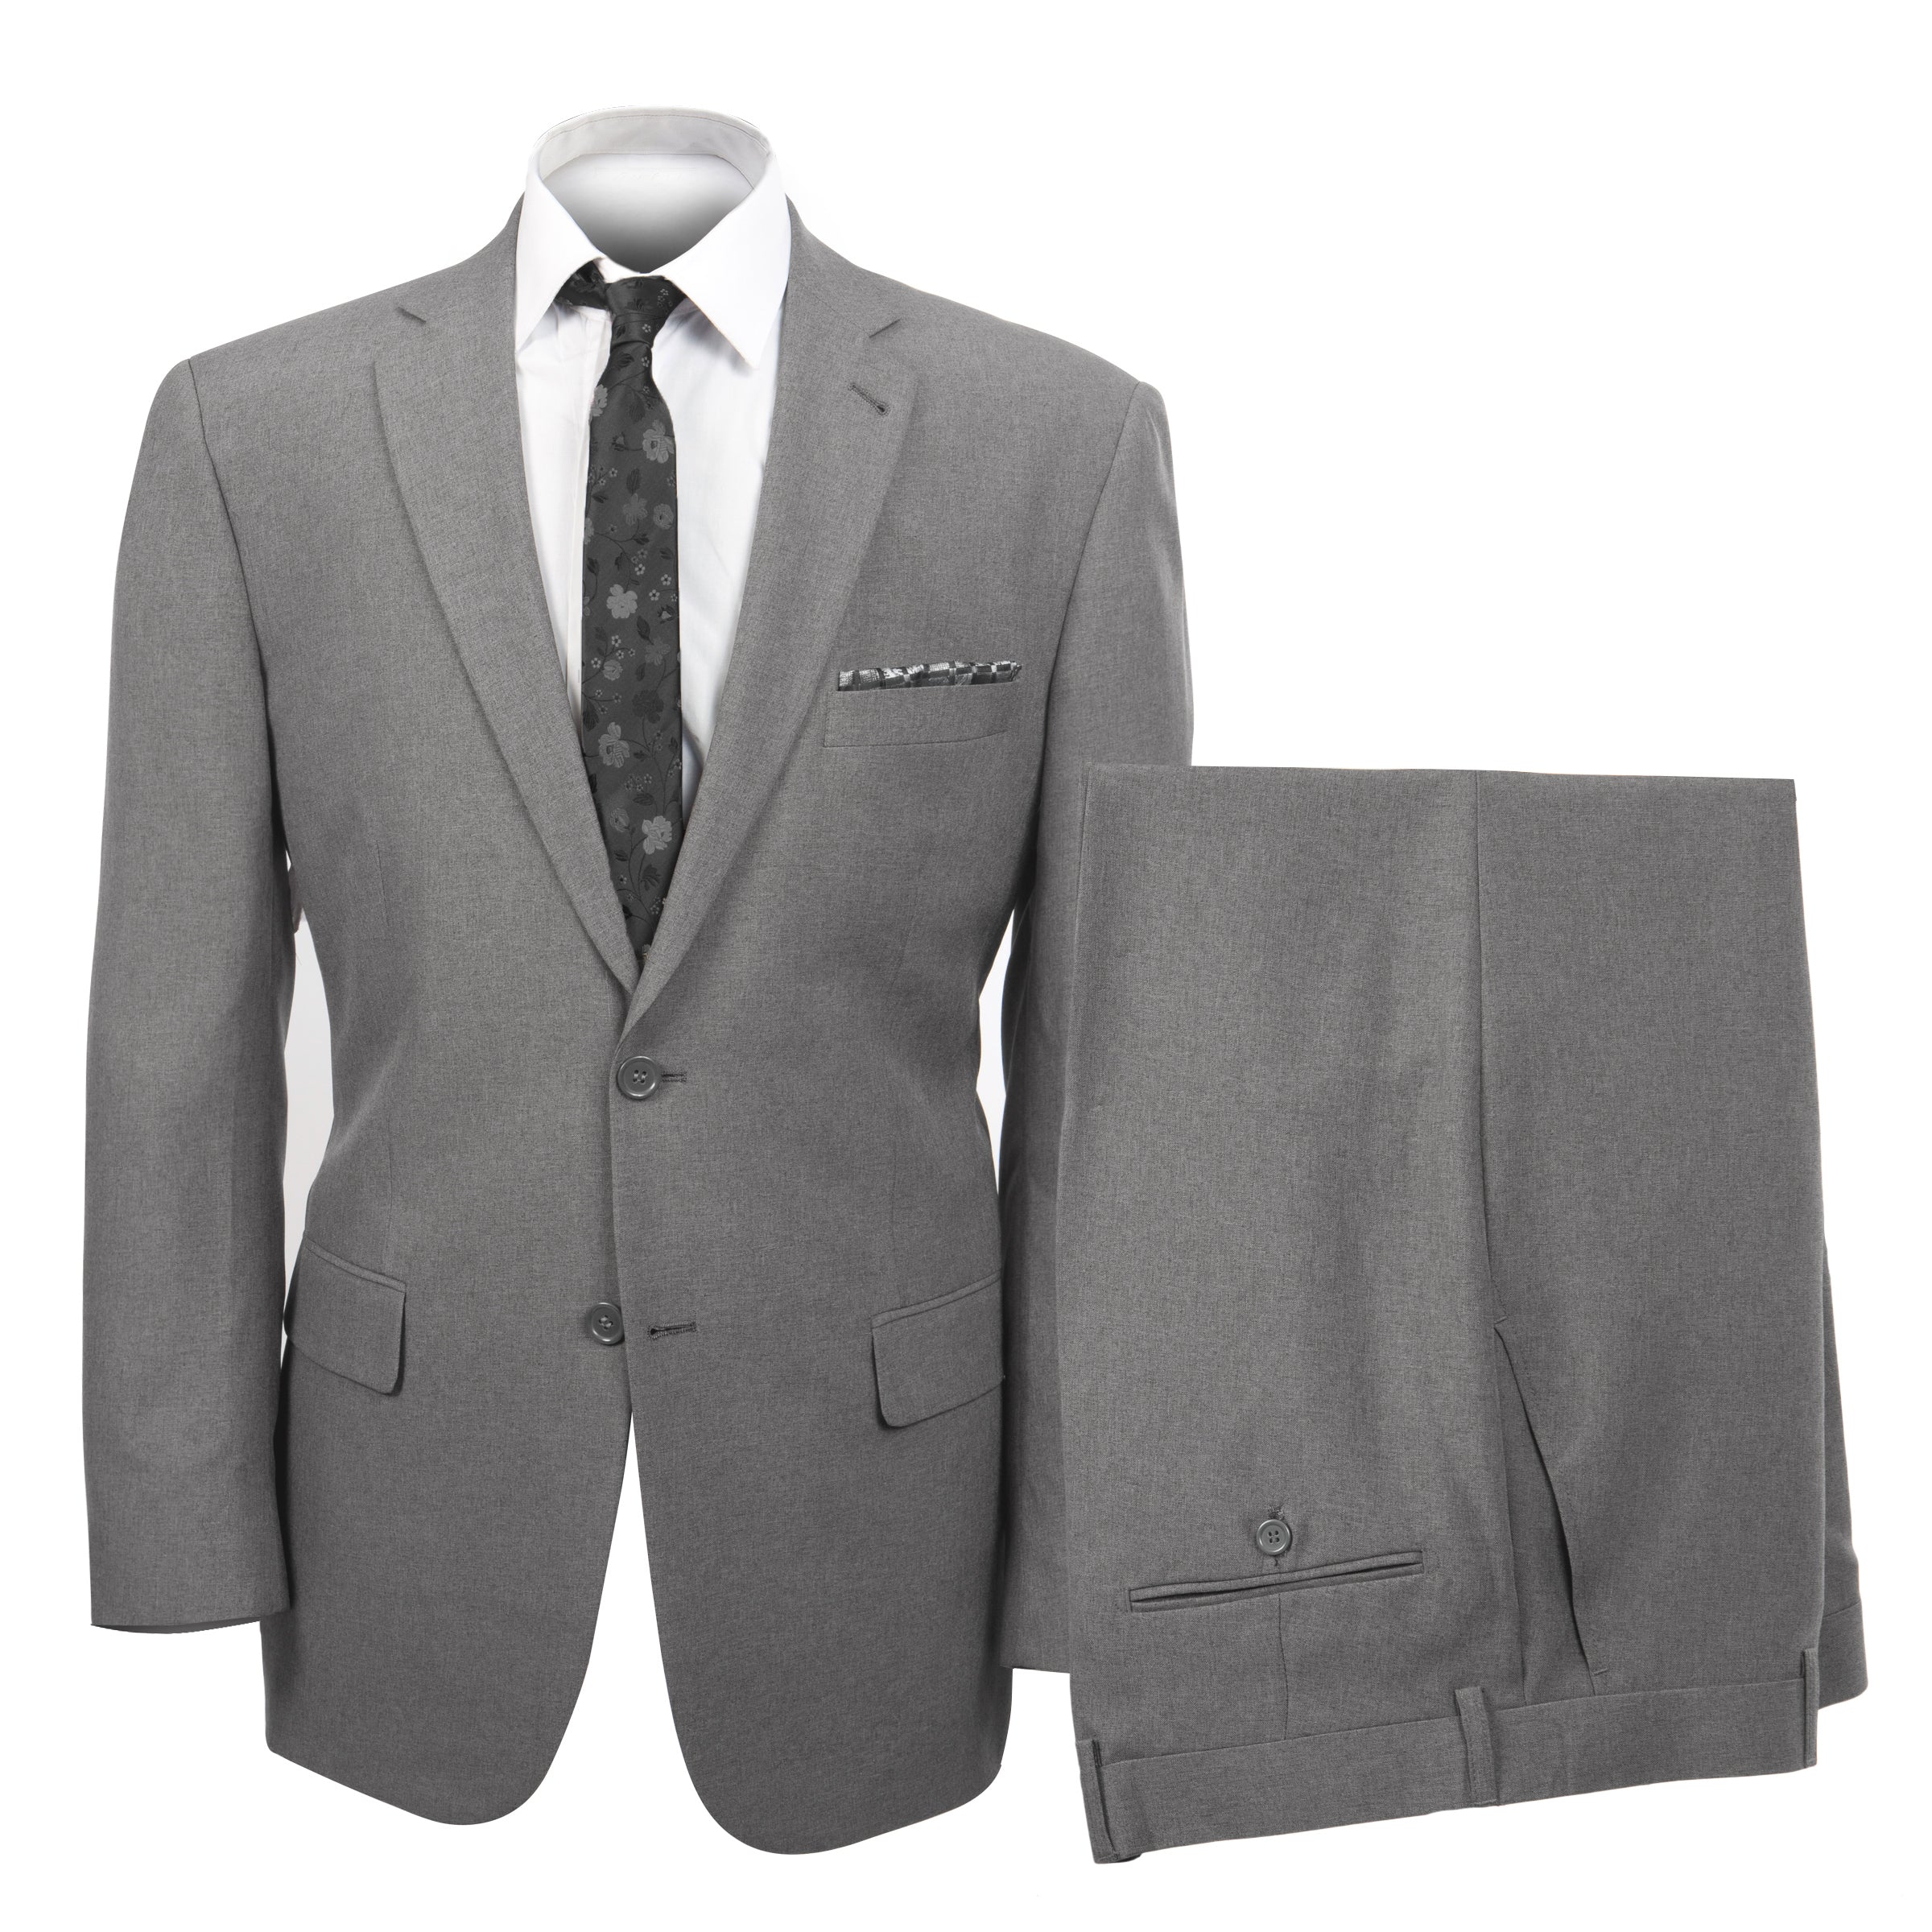 Grey Suit For Men Formal Suits For All Ocassions M116-02